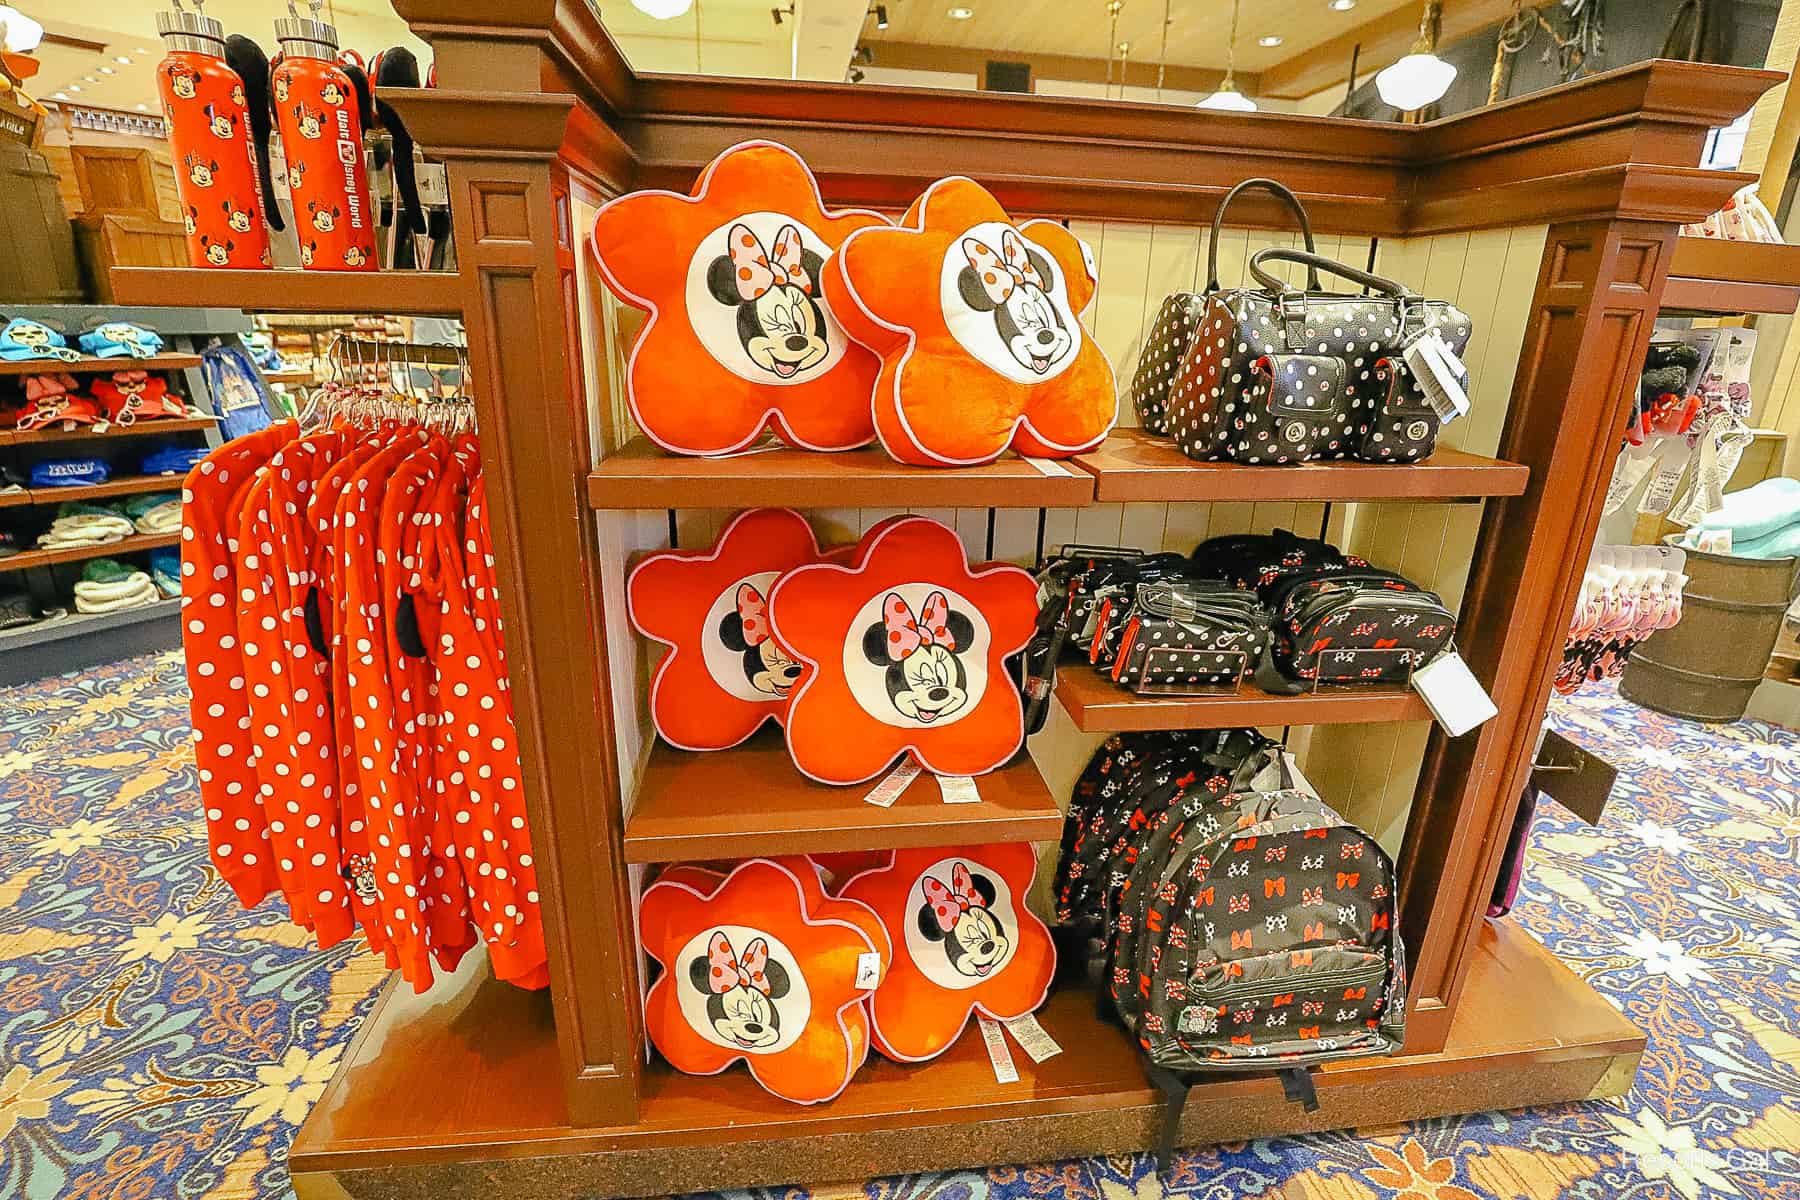 a display of pillows and accessories with Minnie Mouse 